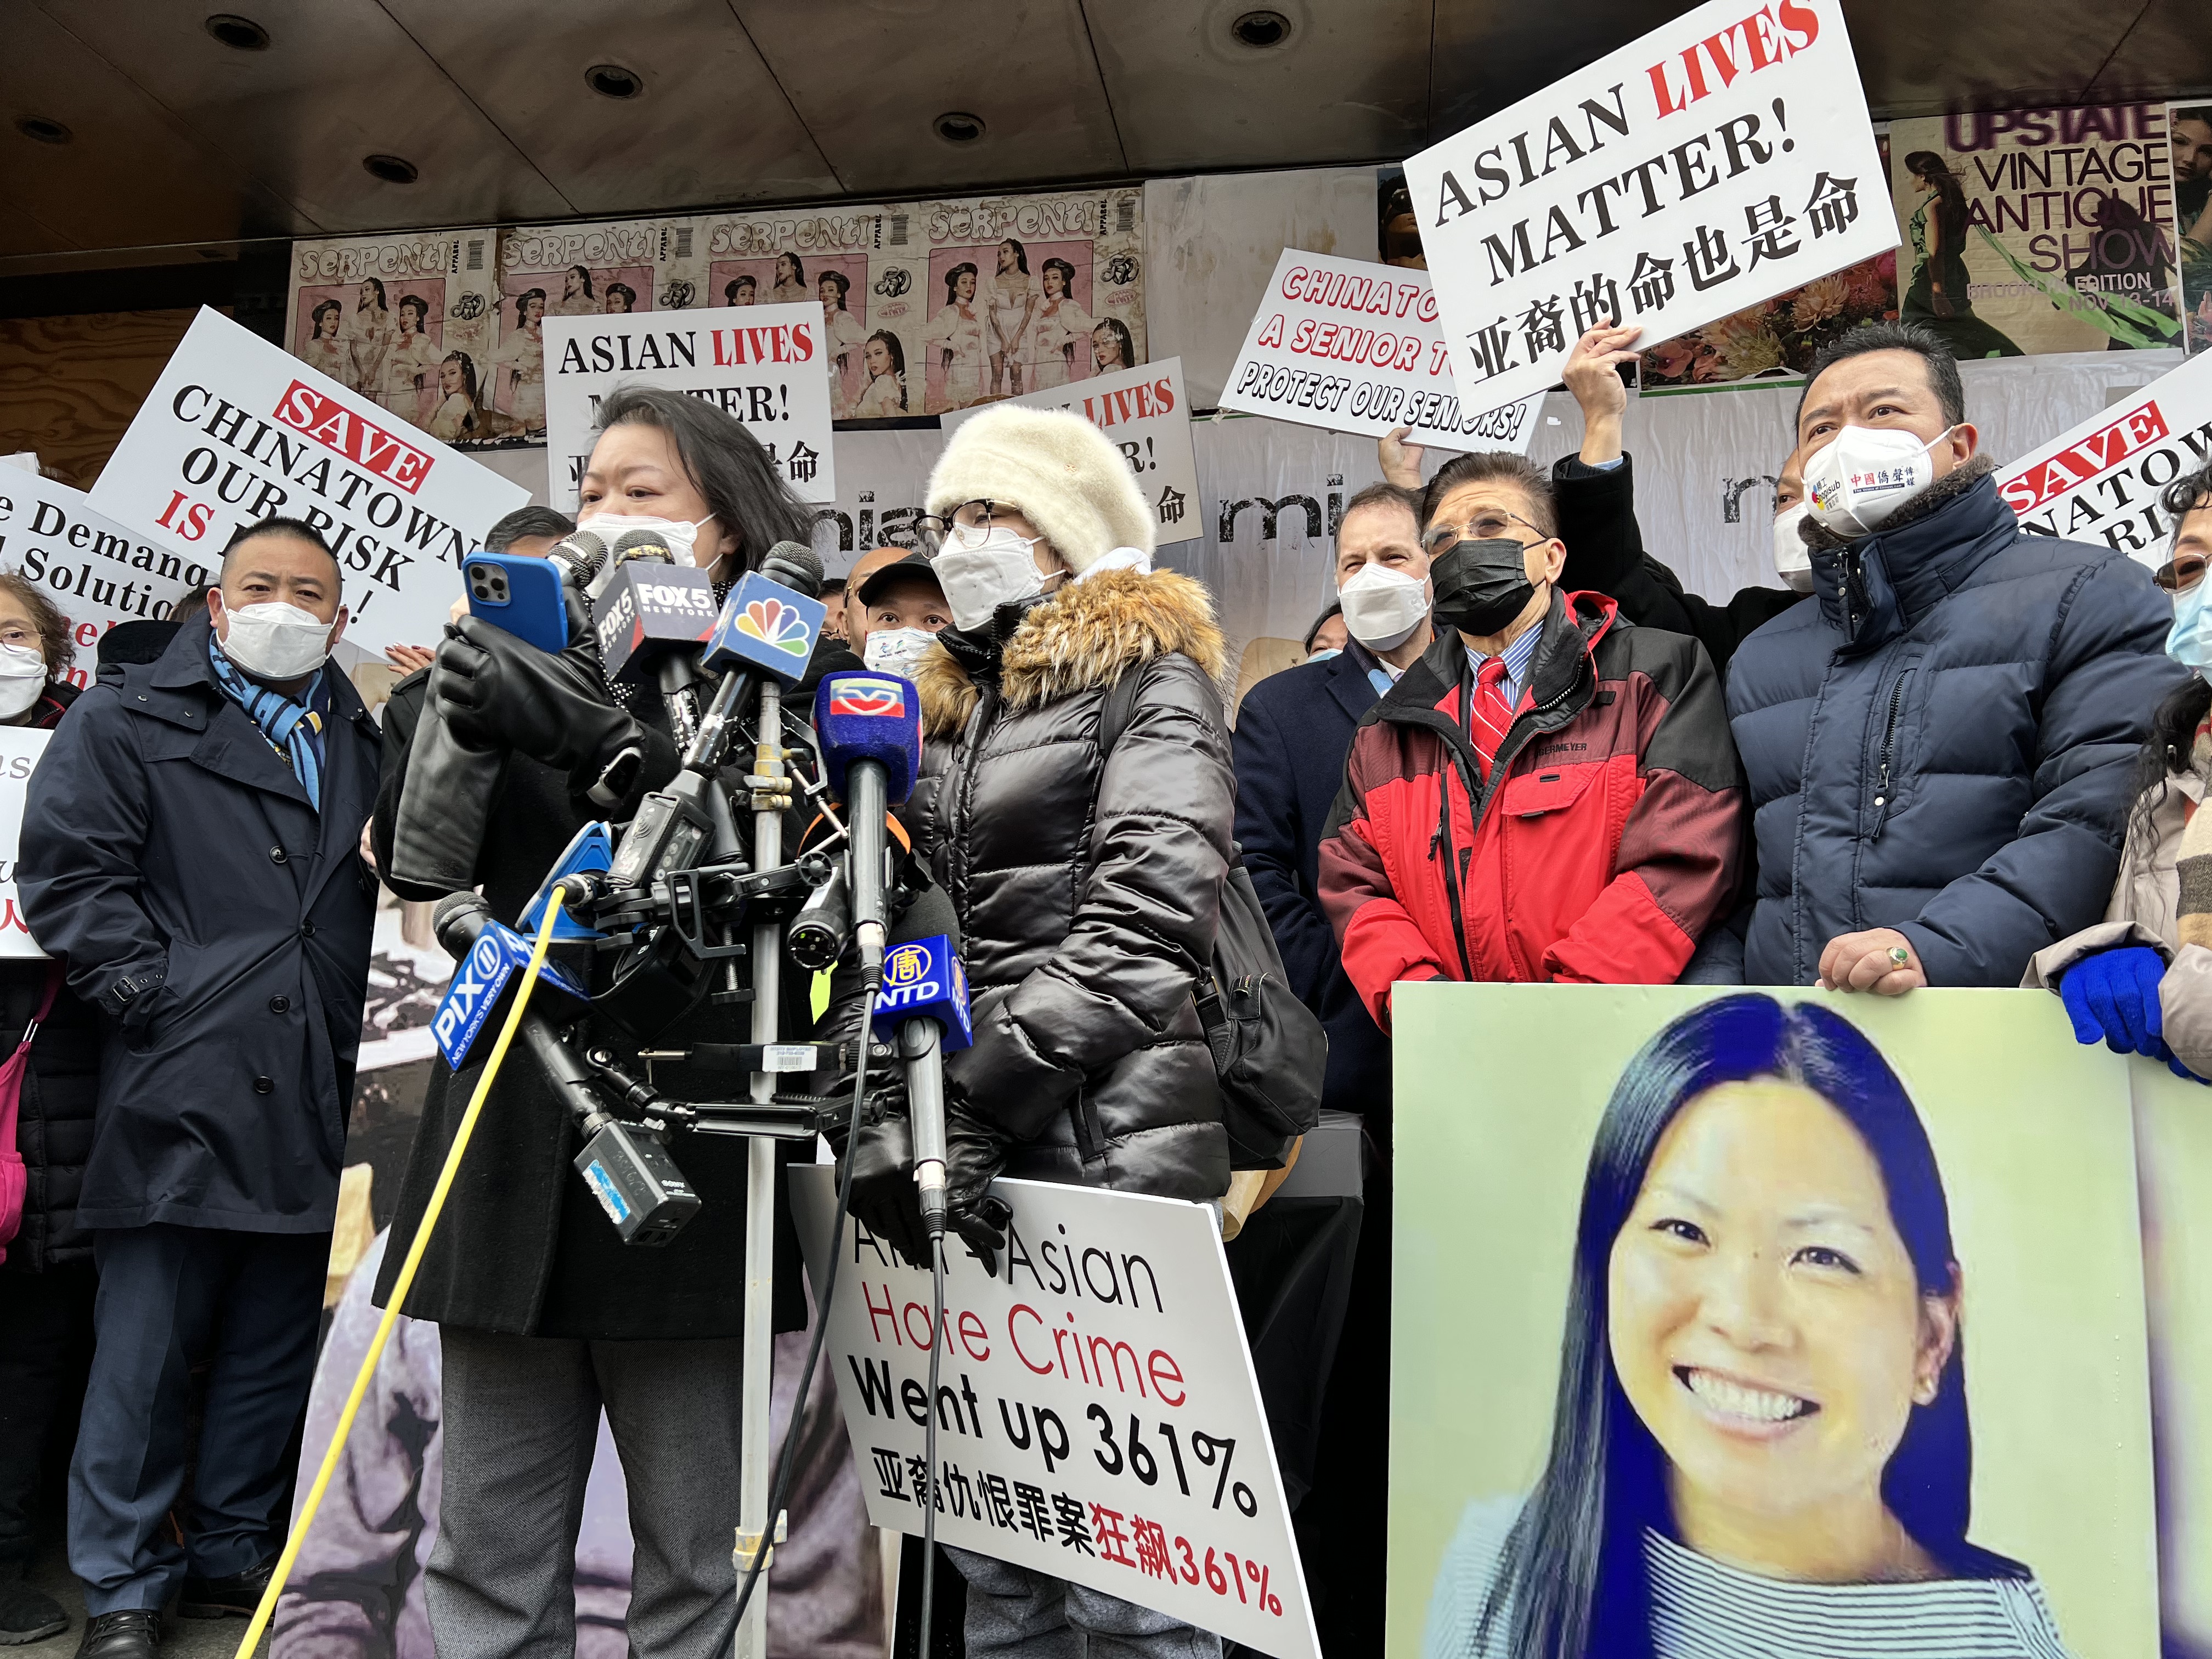 Hate crime victim Fan Sui Yam spoke at the rally mourning the death of Michelle Alyssa Go, who was pushed into NYC subway tracks by a mentally distressed homeless man. (Hannah Cai/The Epoch Times)